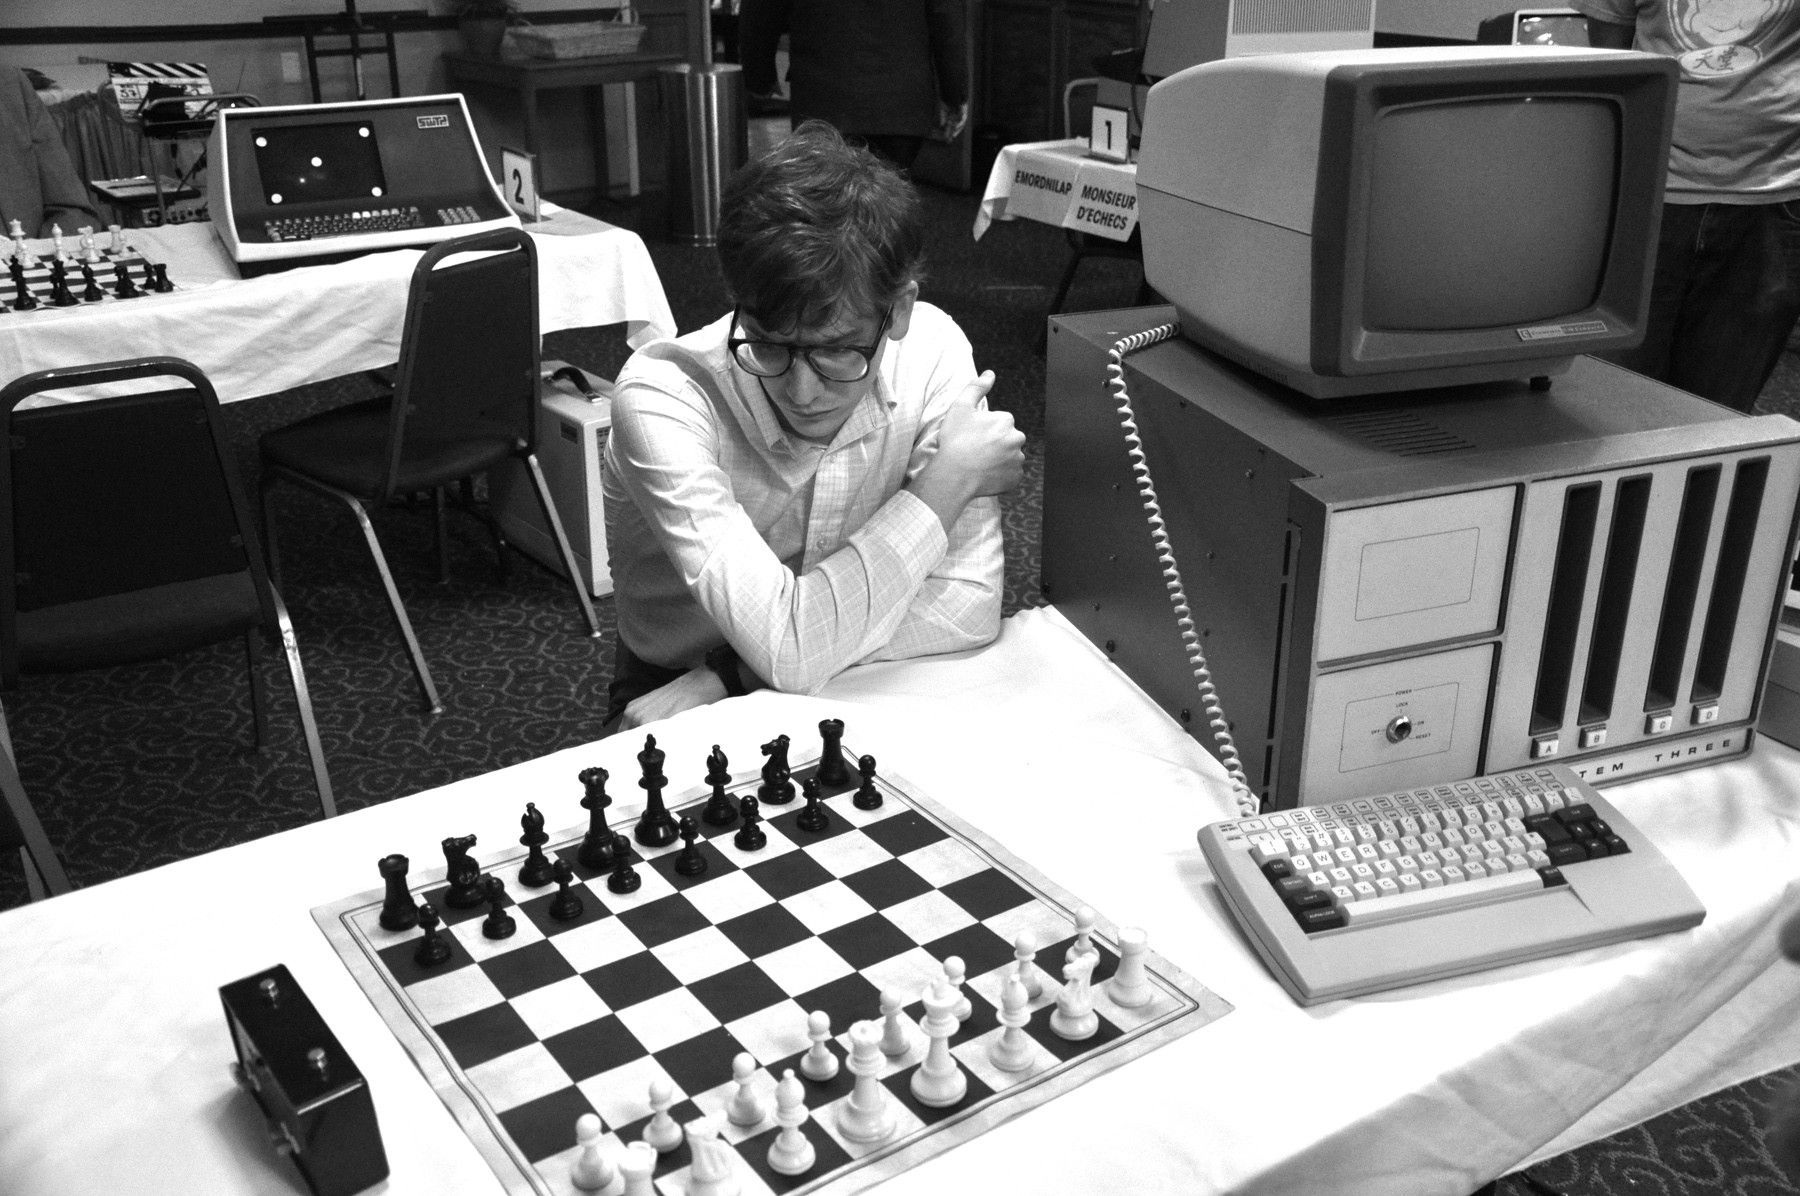 Computer chess: An opponent and an ally 